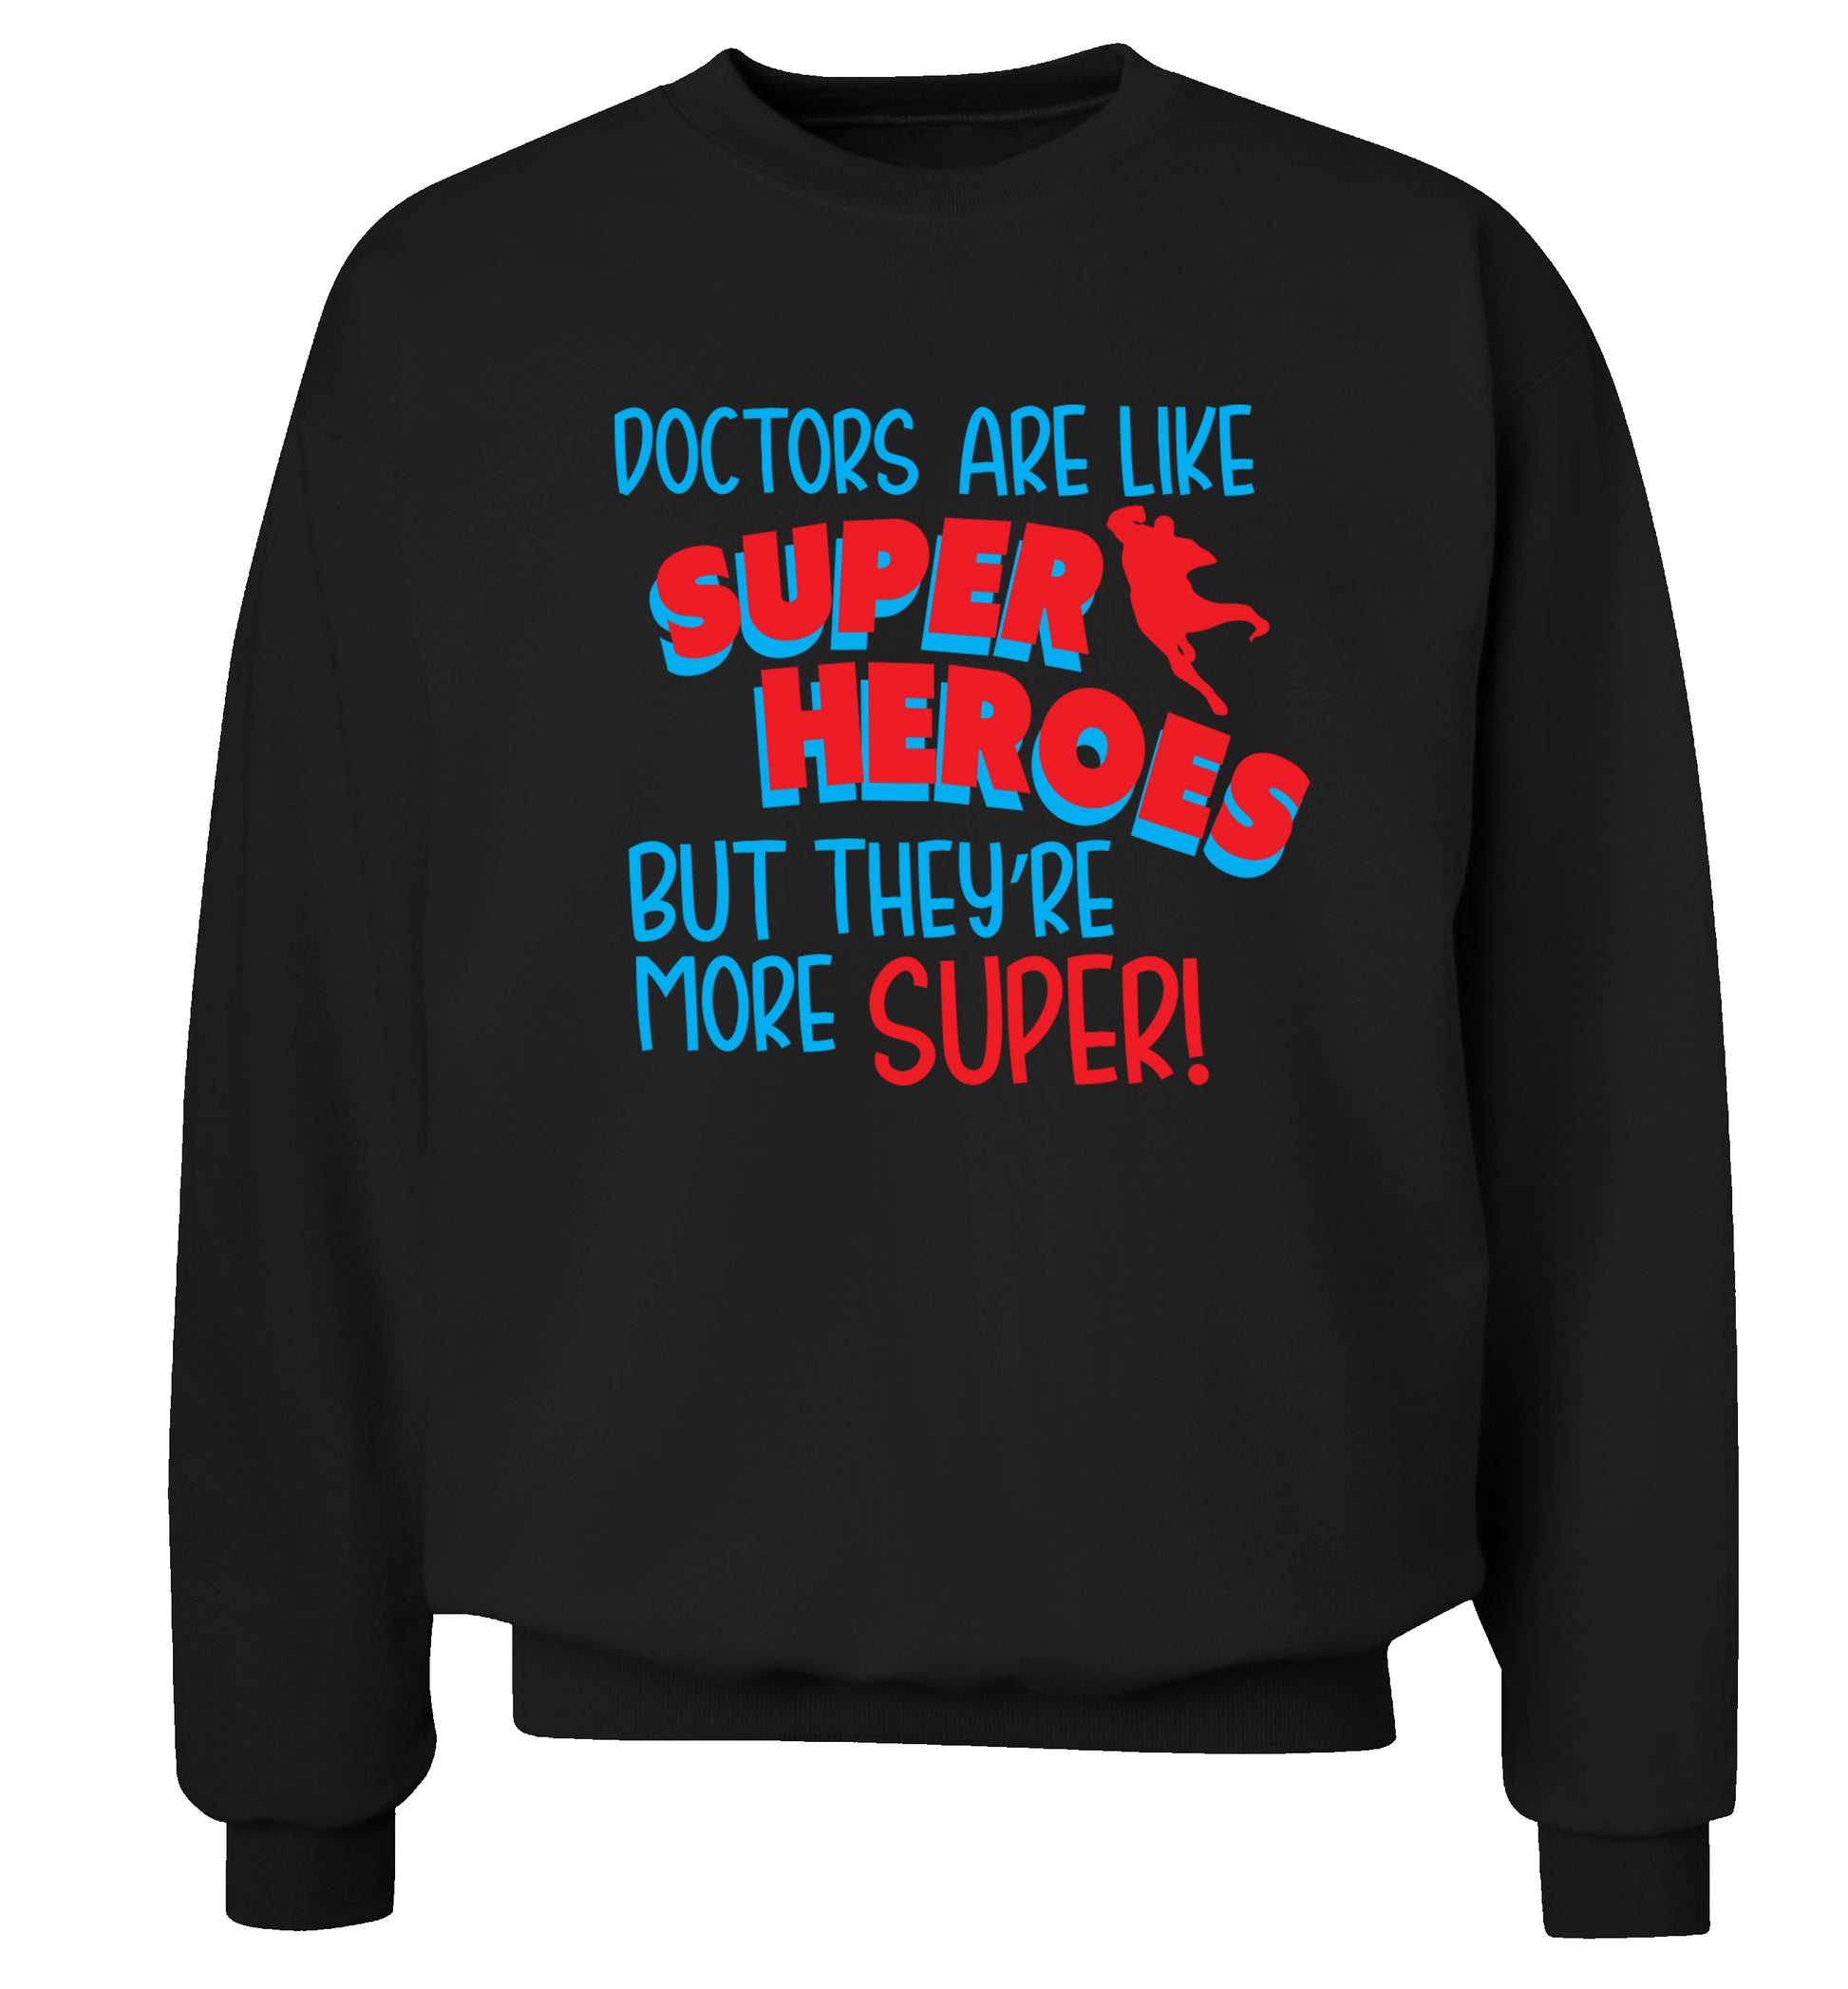 Doctors are like superheros but they're more super Adult's unisex black Sweater 2XL